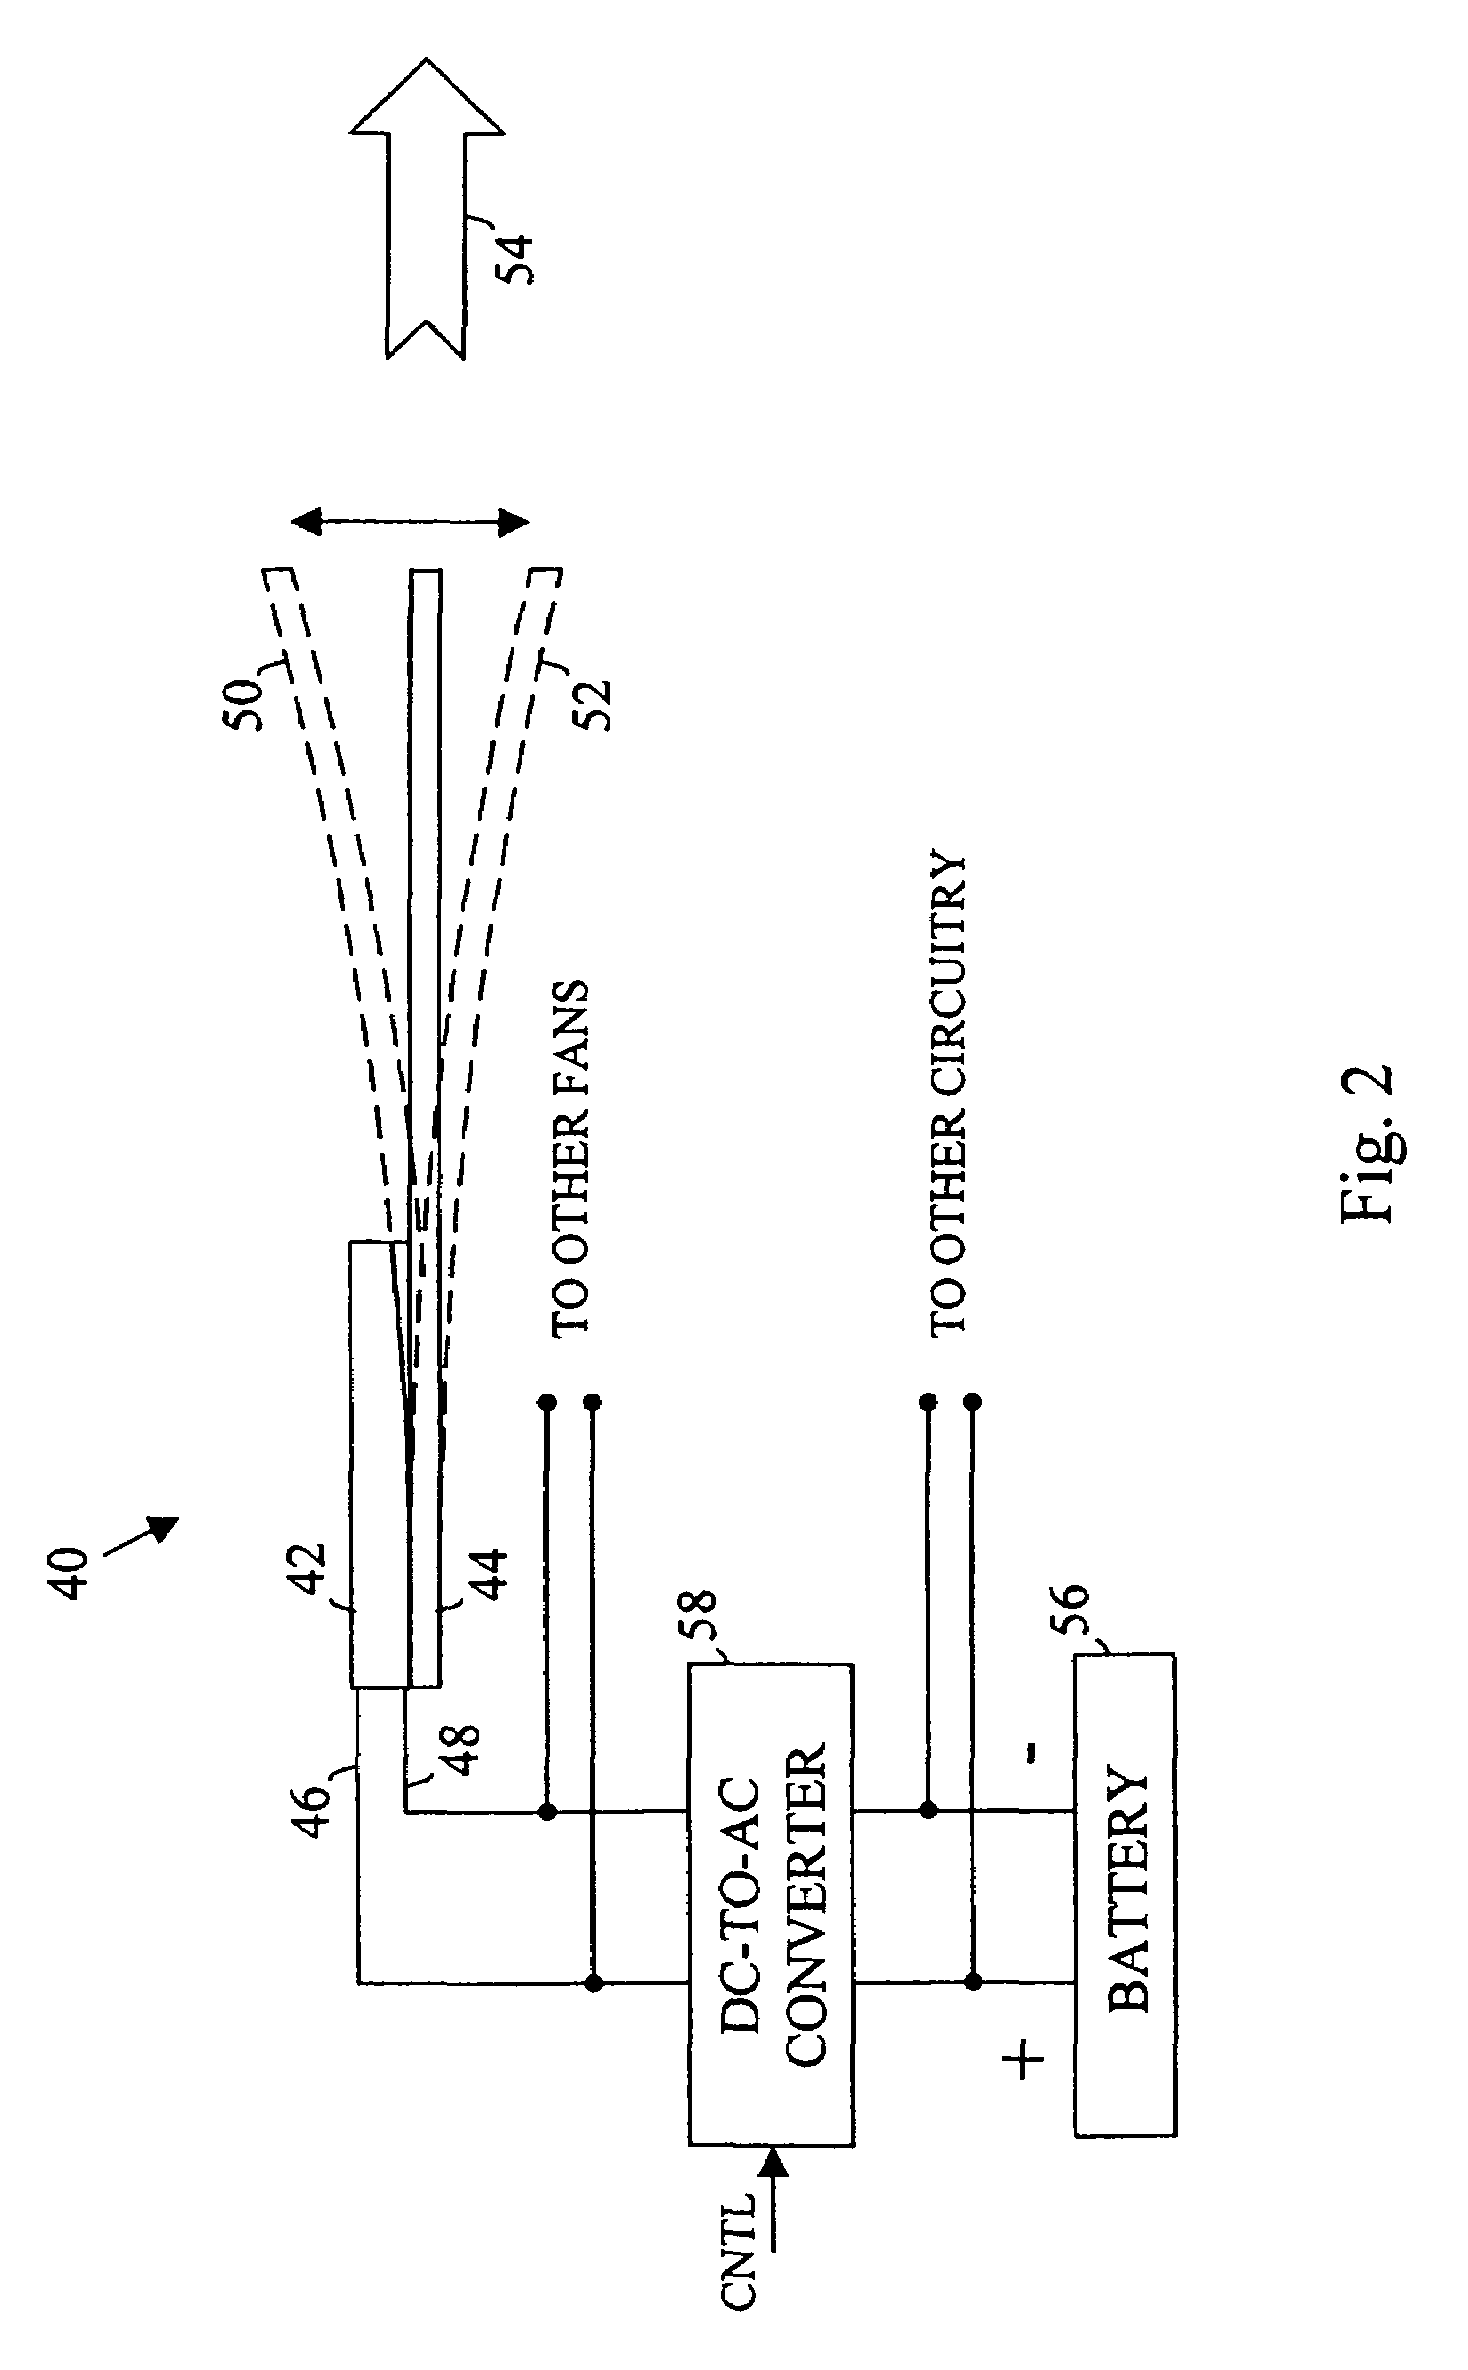 Wireless device enclosure using piezoelectric cooling structures